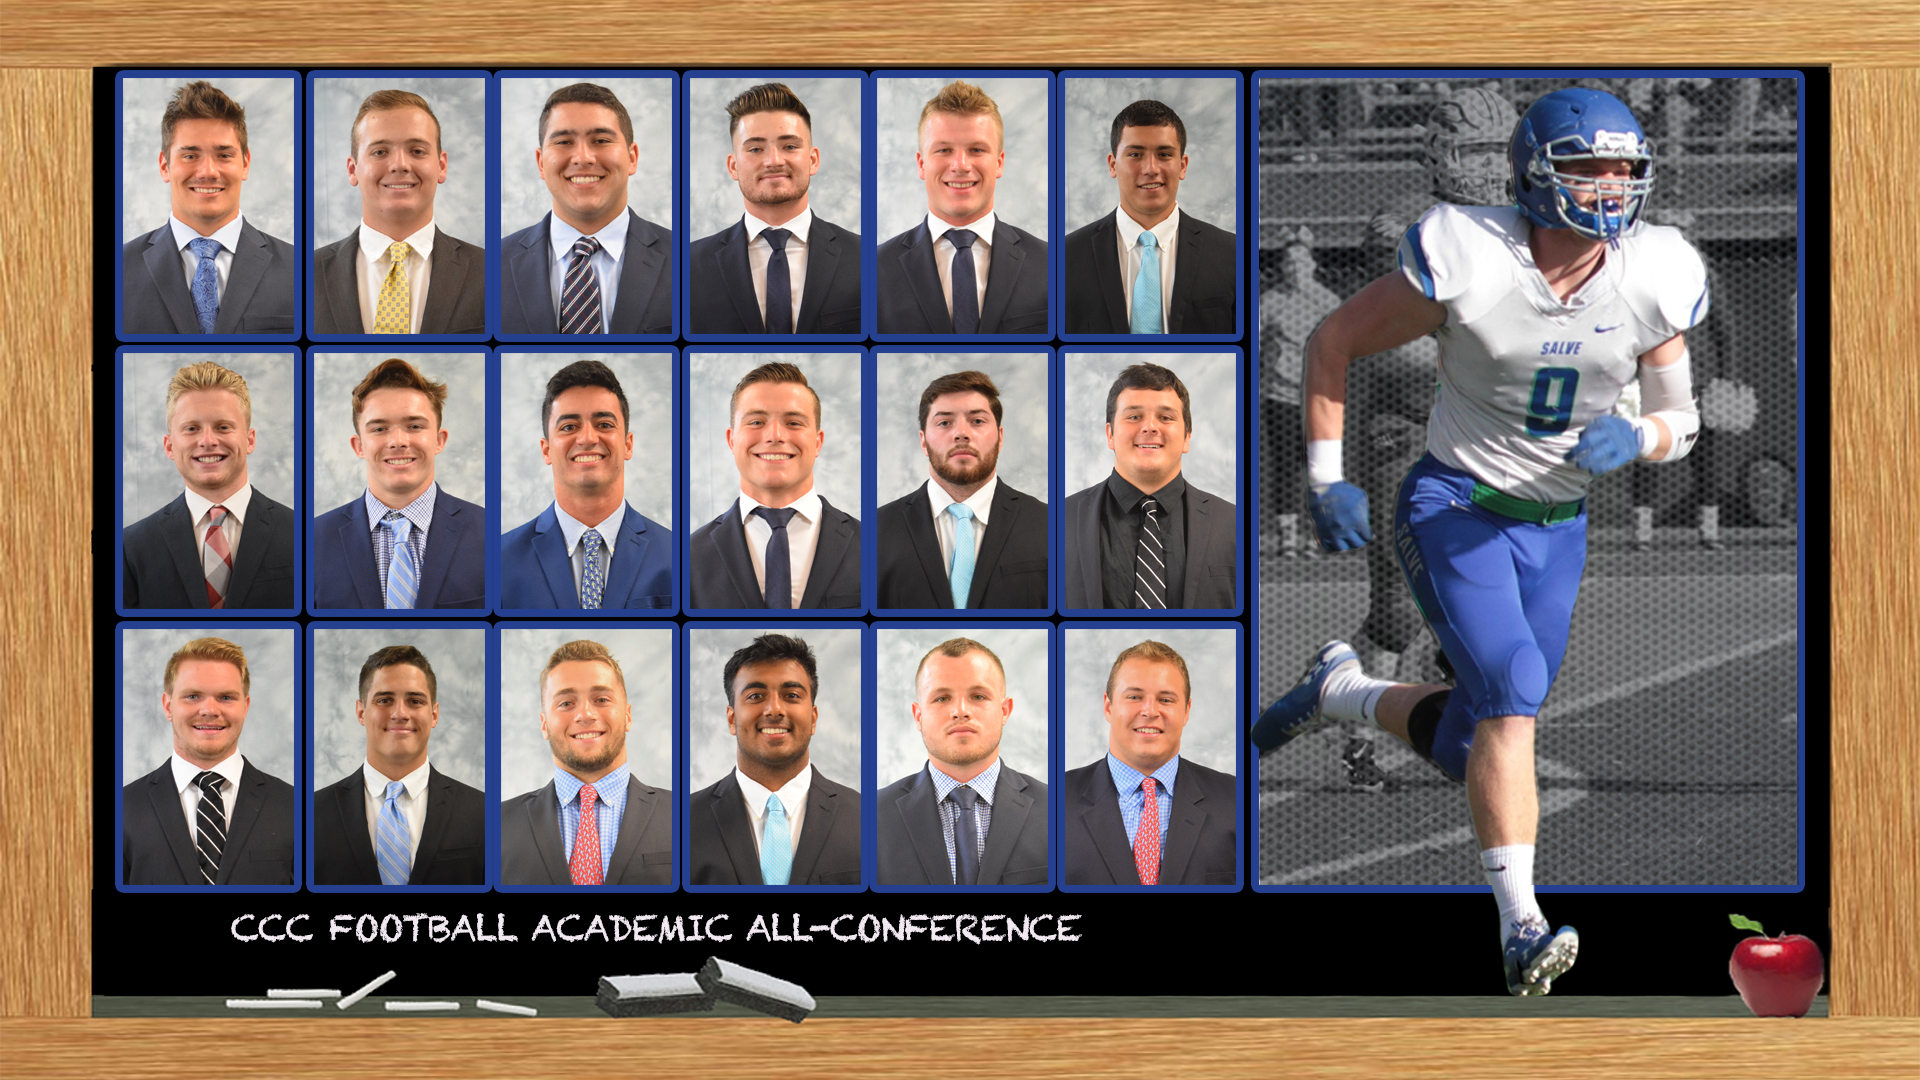 18 student-athletes from the Salve Regina football team made the Academic All-Conference team.